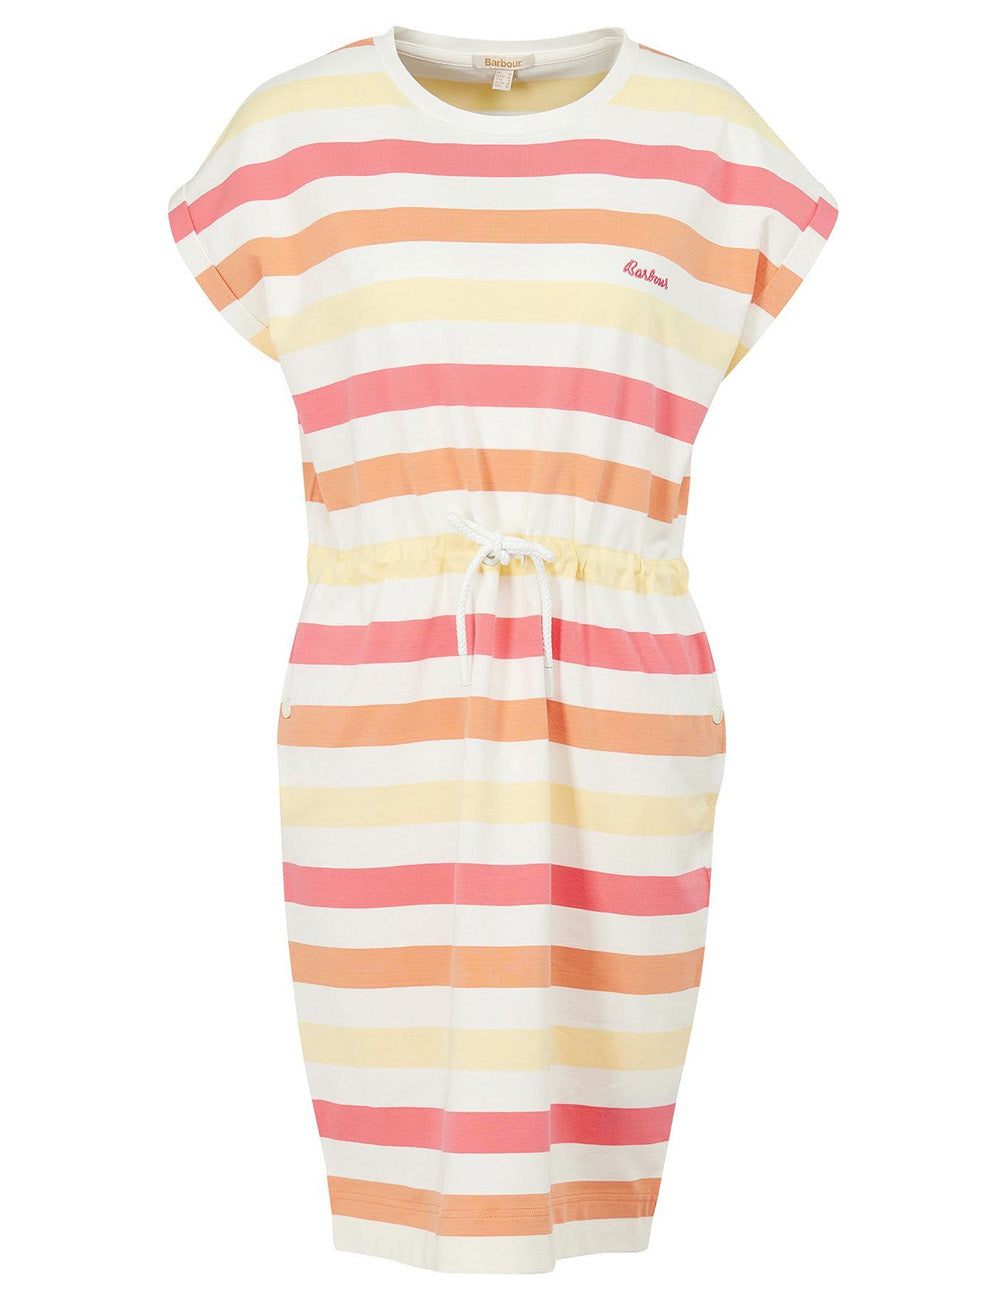 Barbour Marloes Stripe Dress on a white background